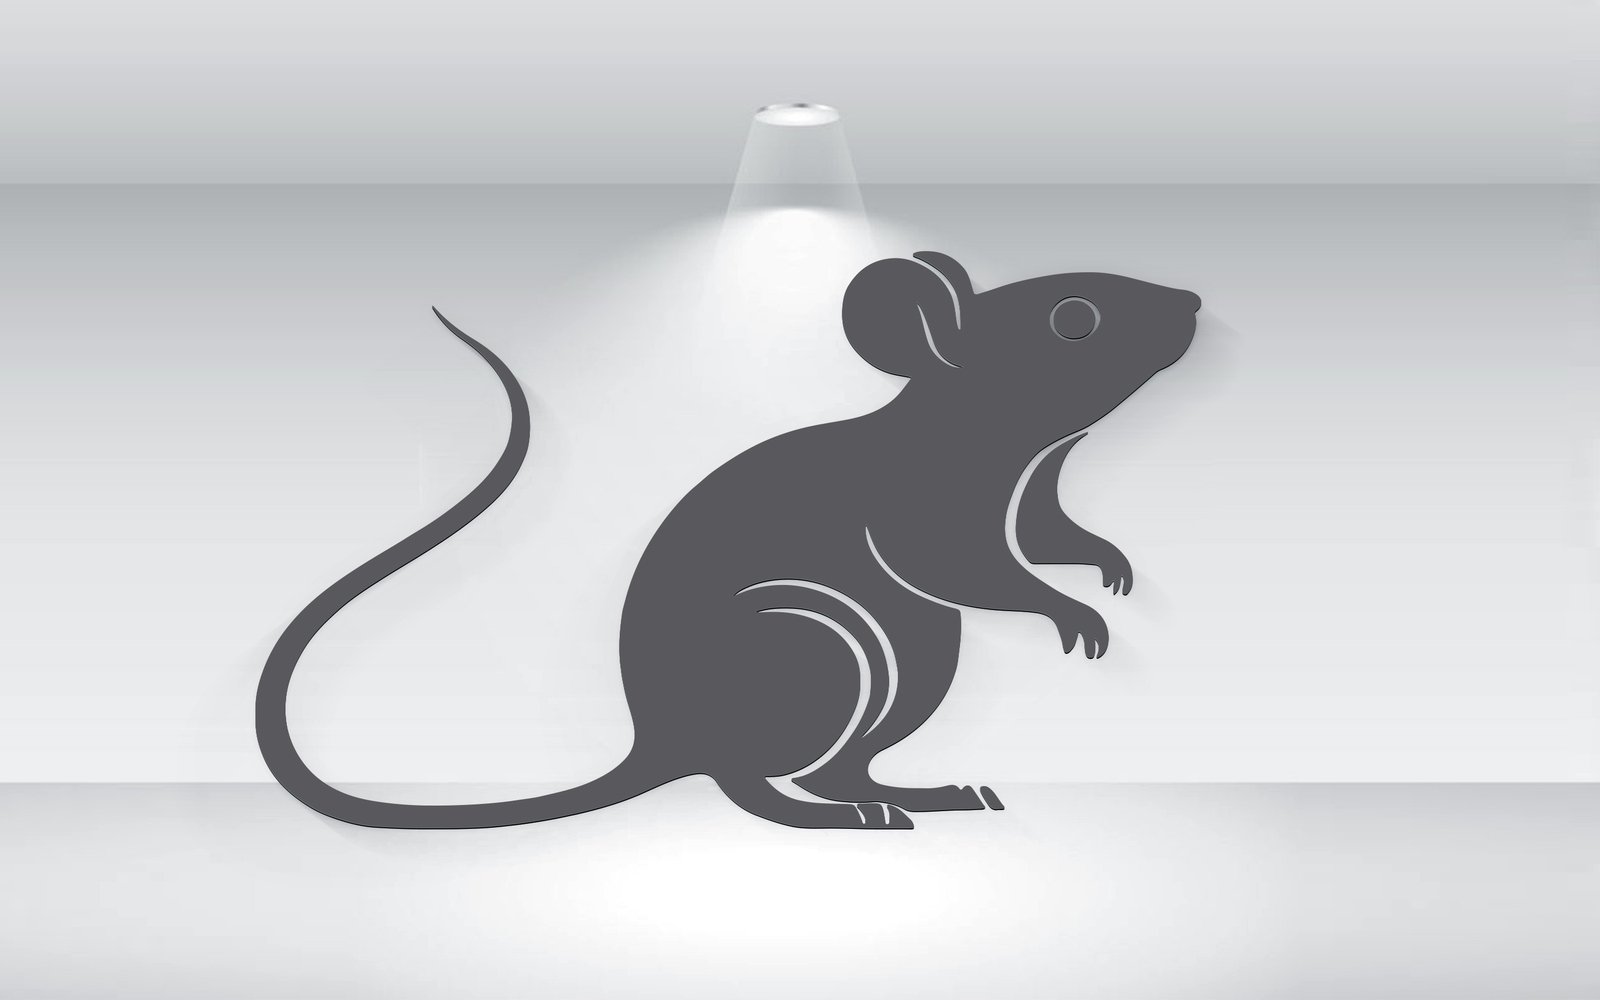 Mouse Illustration Silhouette Vector Format